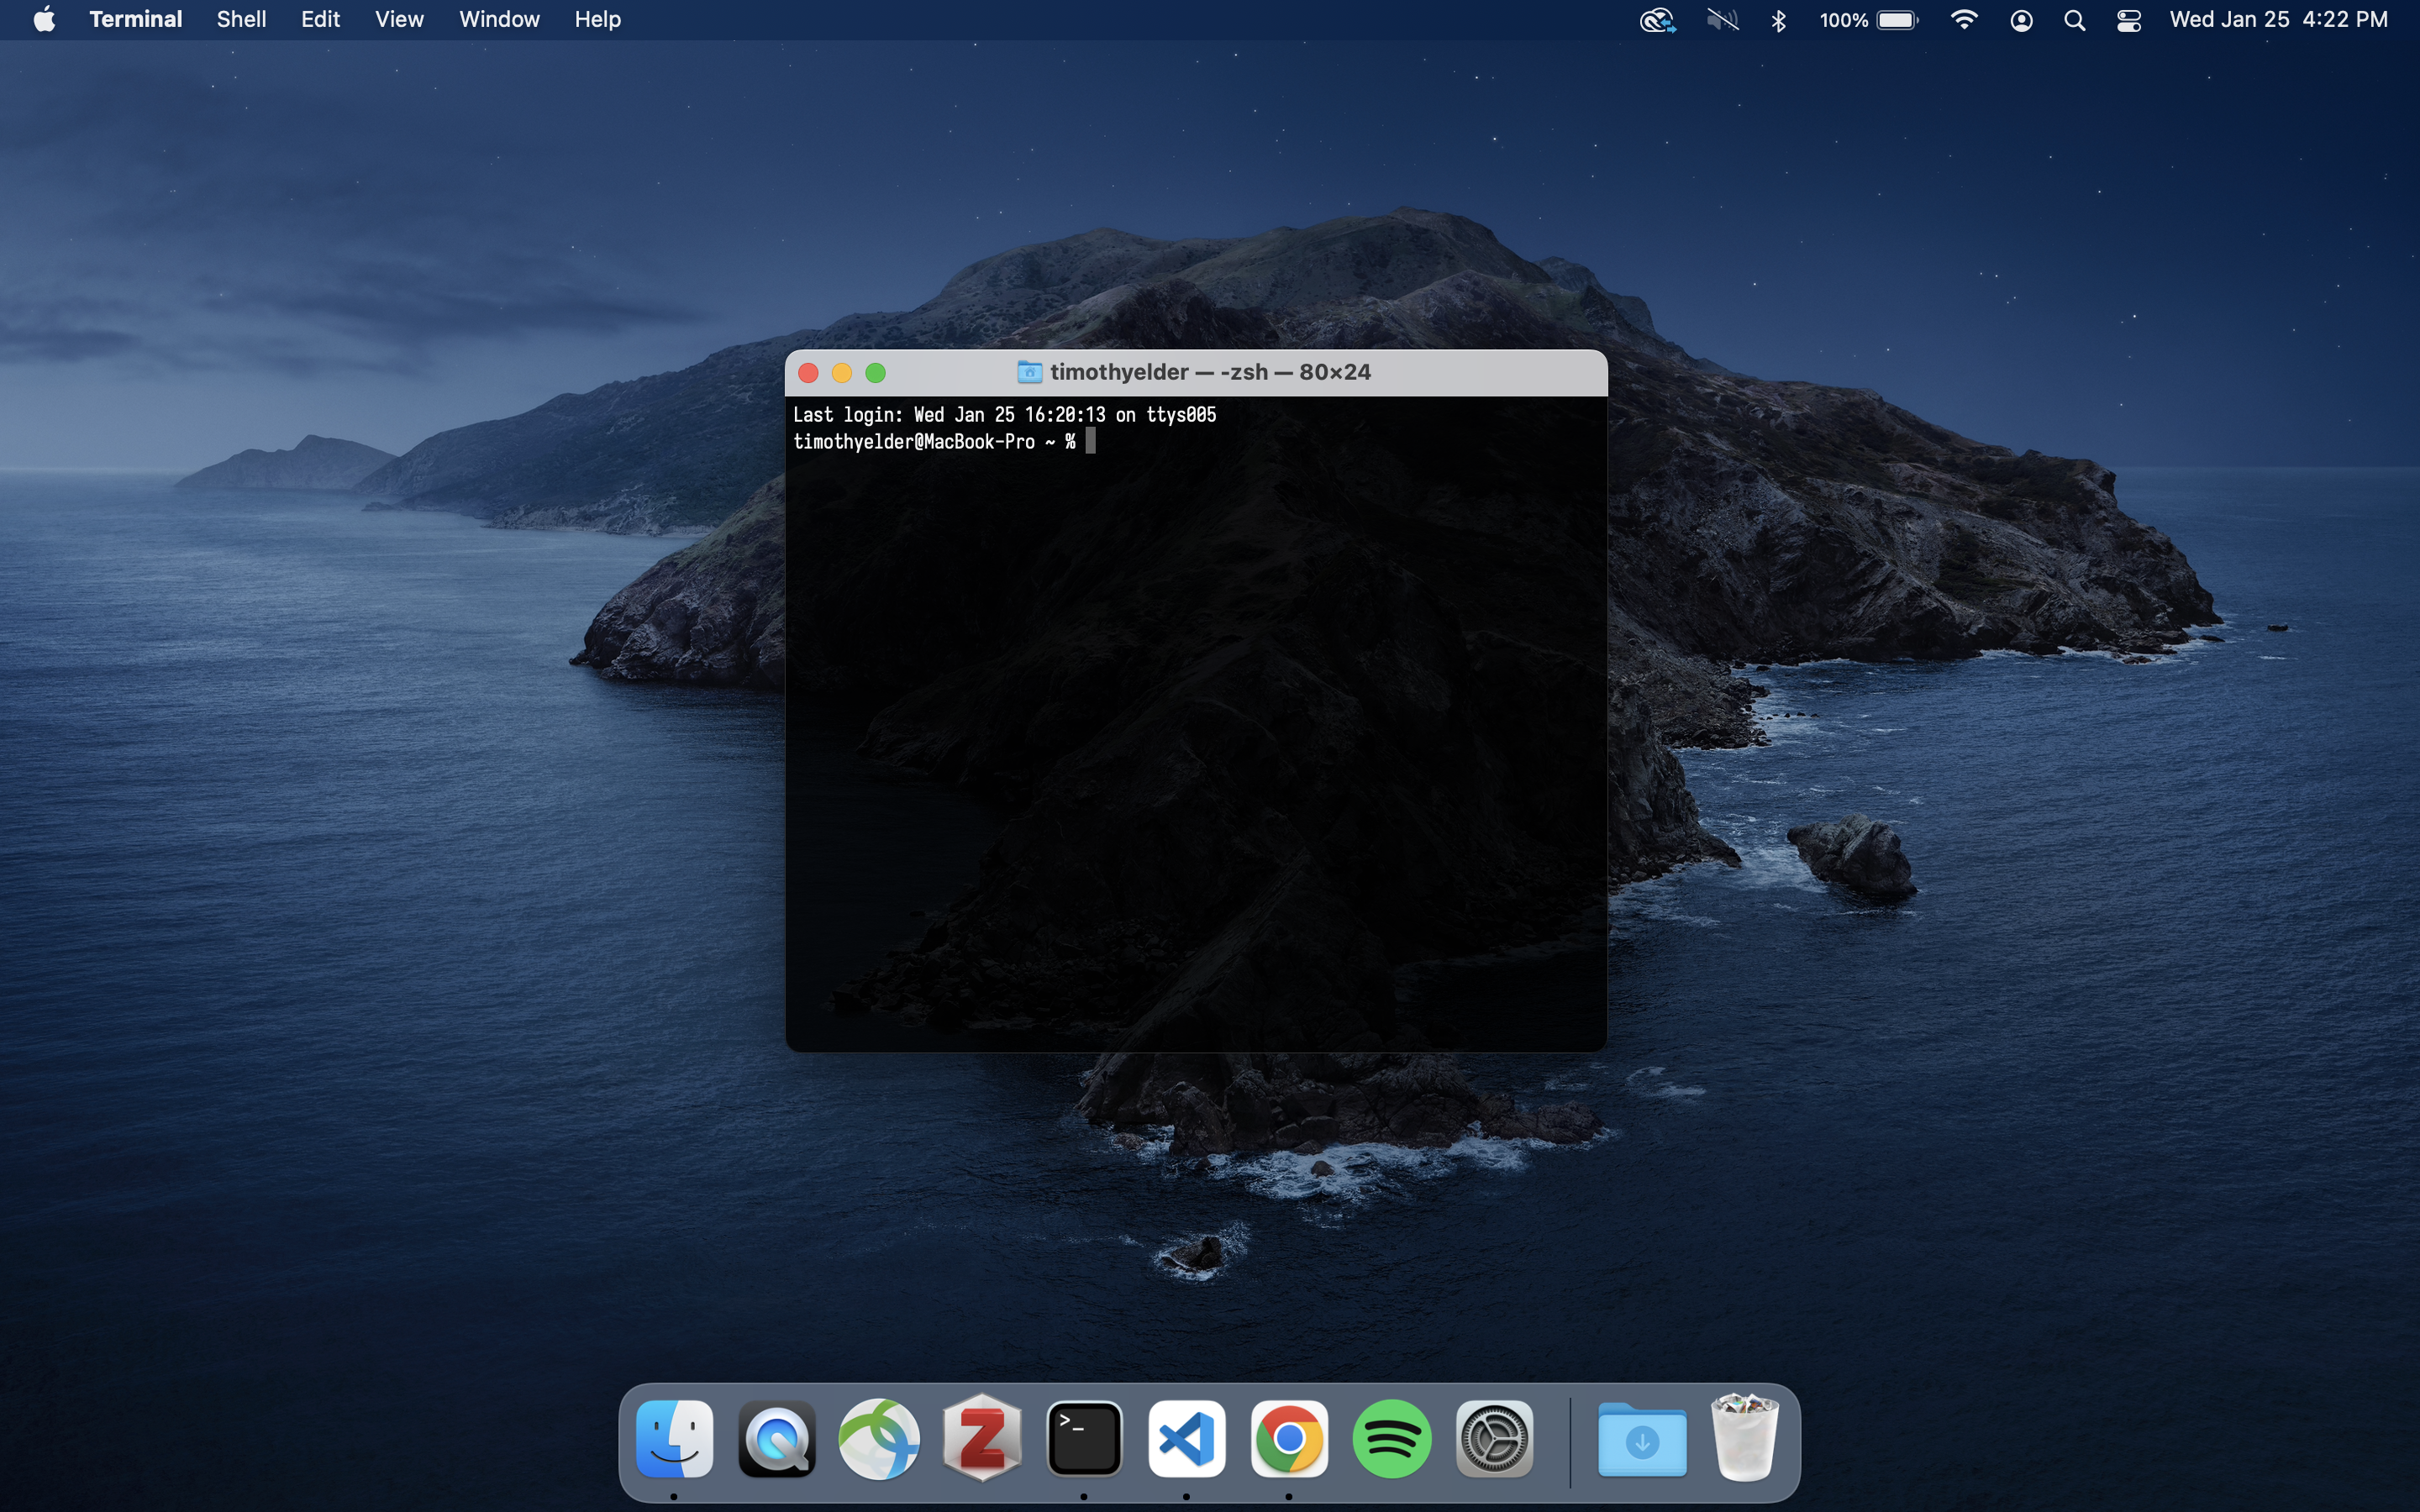 The Terminal in macOS